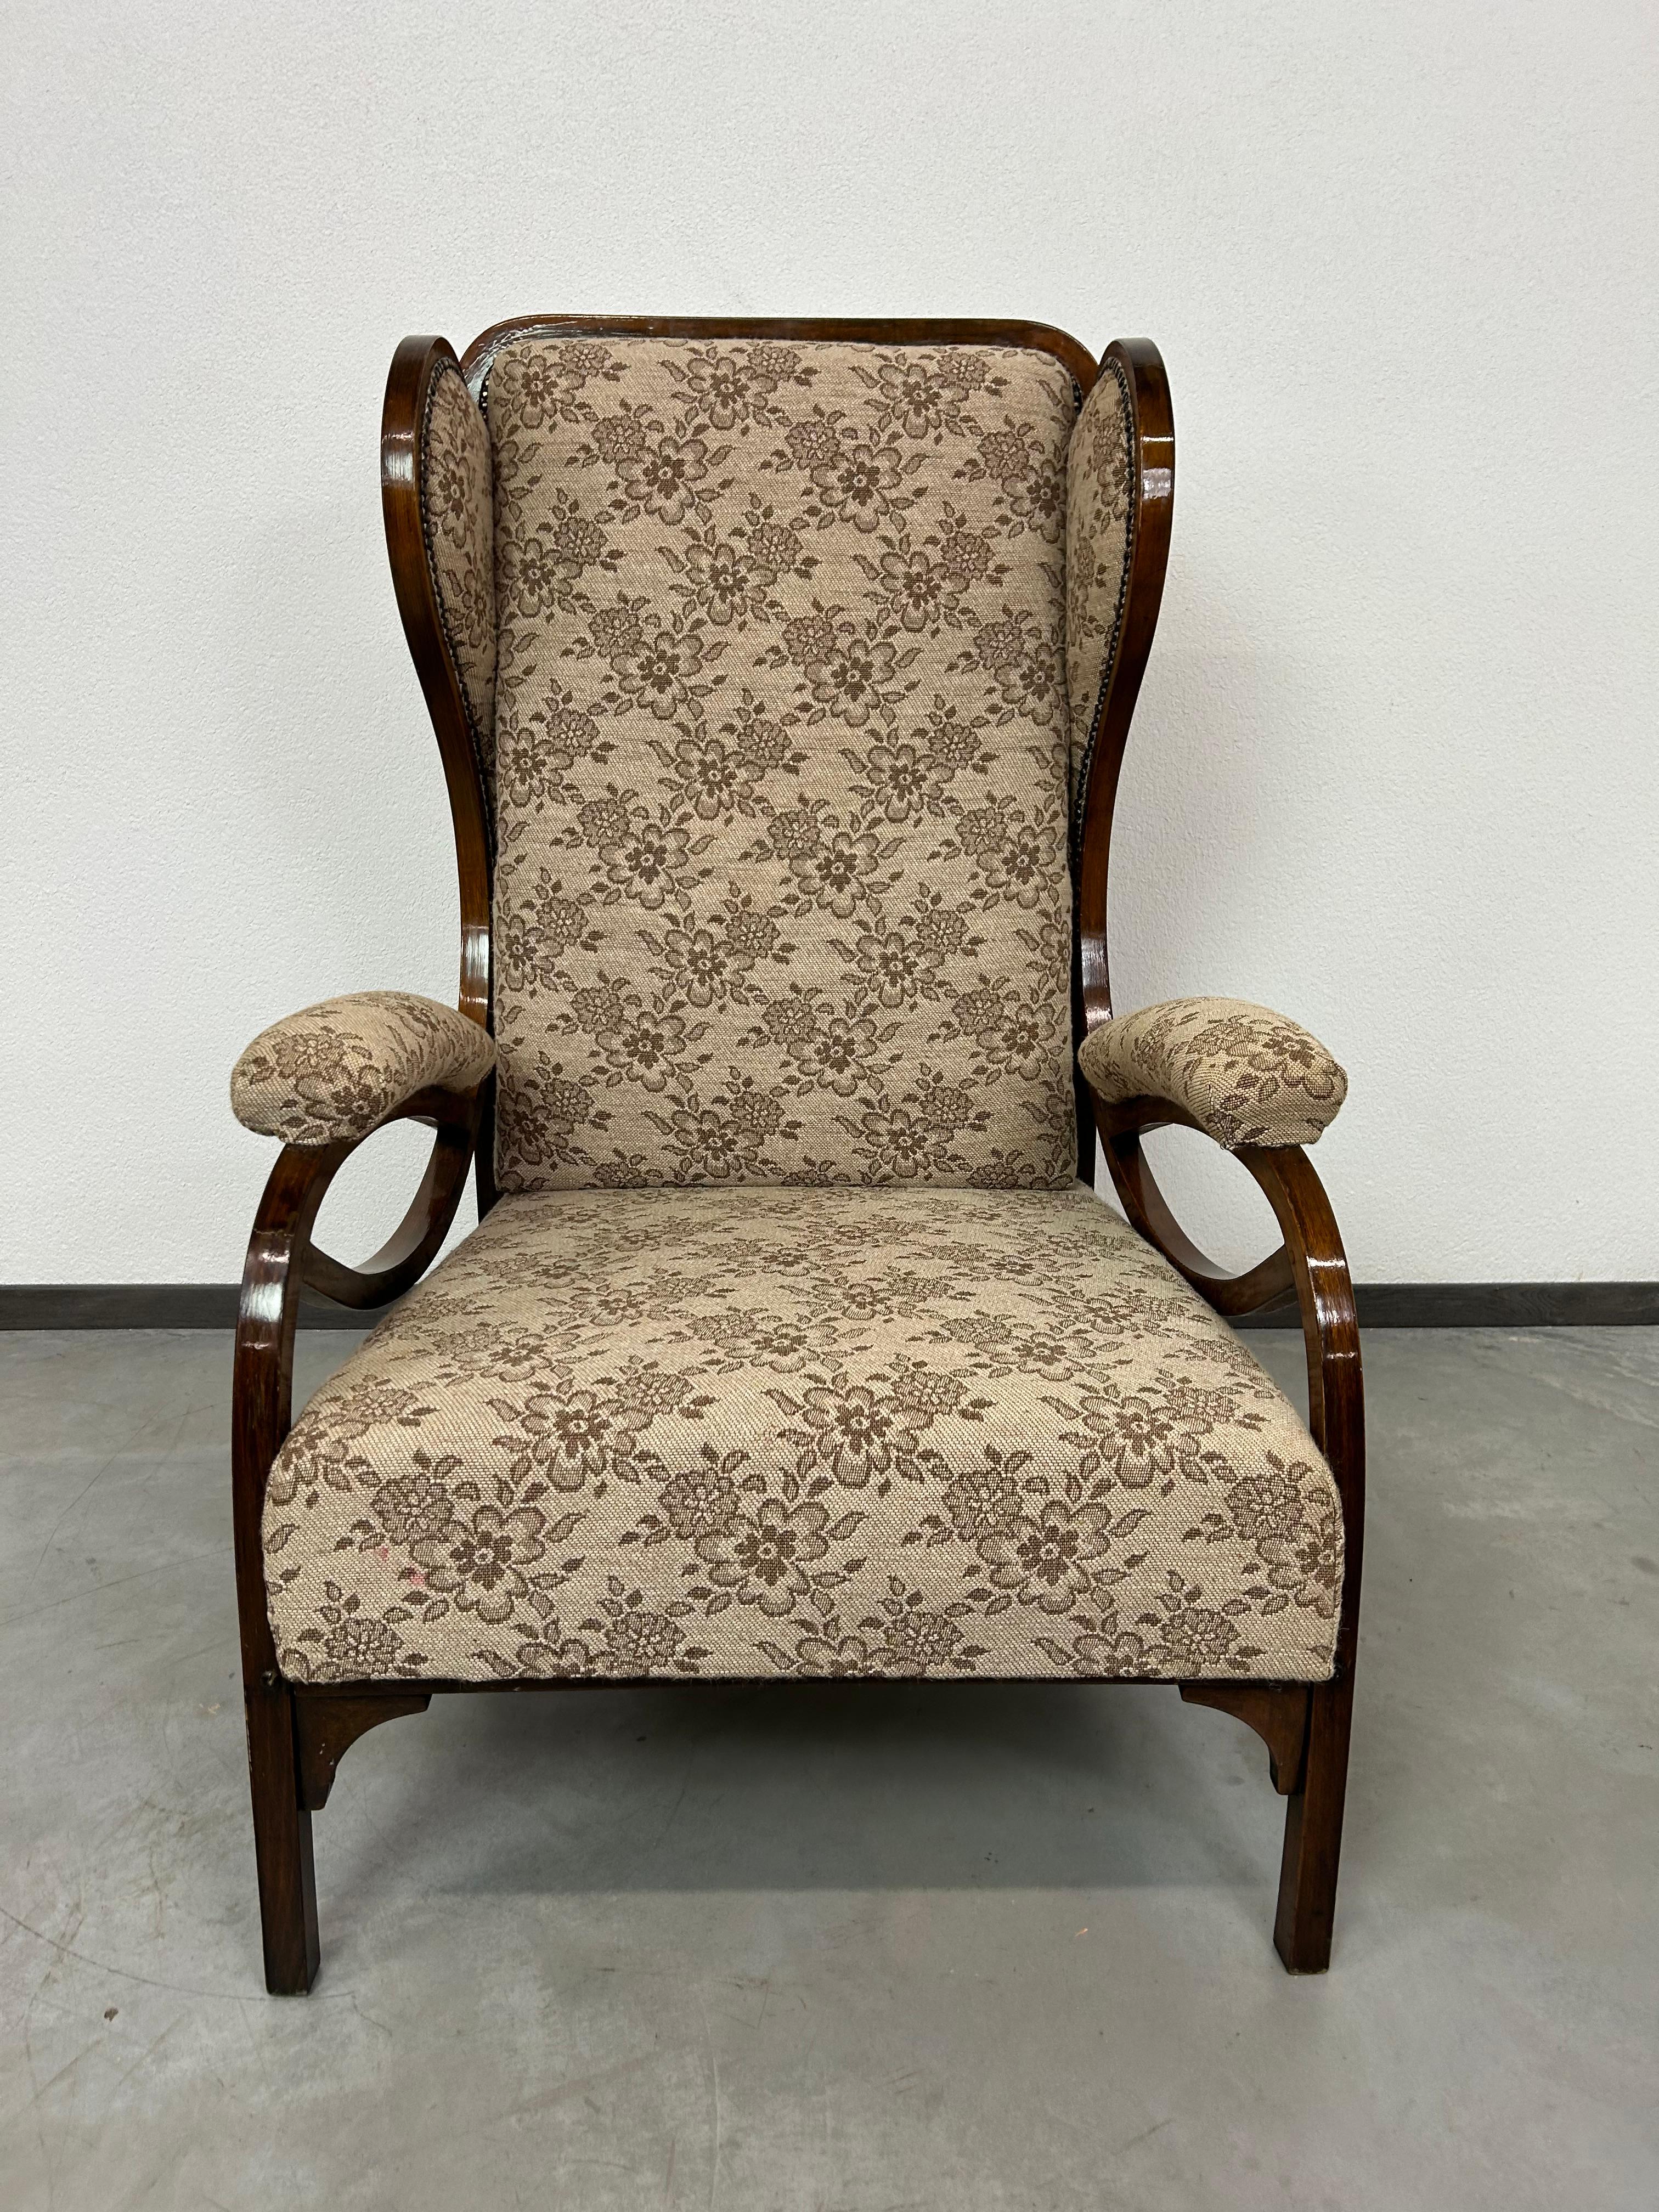 Art nouveau wingchair no.6542 by Thonet in original vintage condition with signs of use.